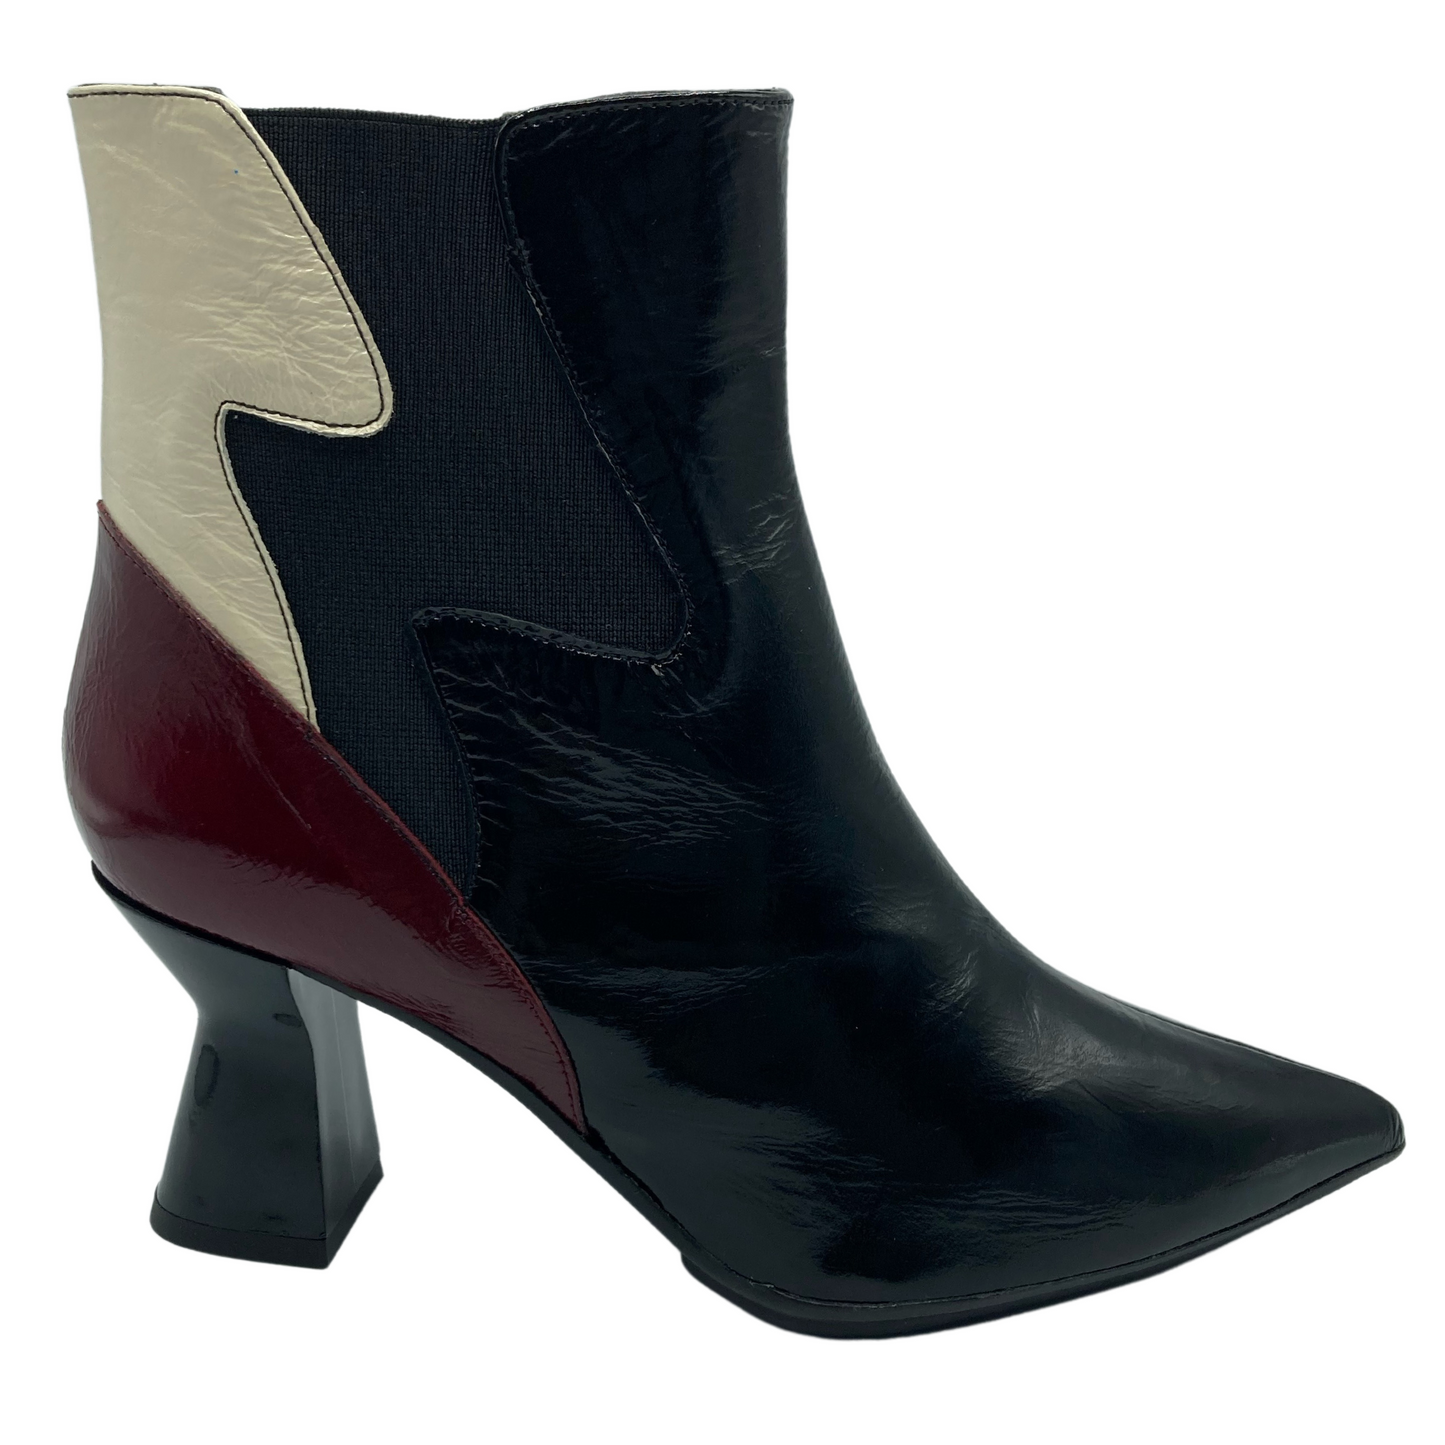 Right facing view of black leather ankle boot with white and red leather details on shaft